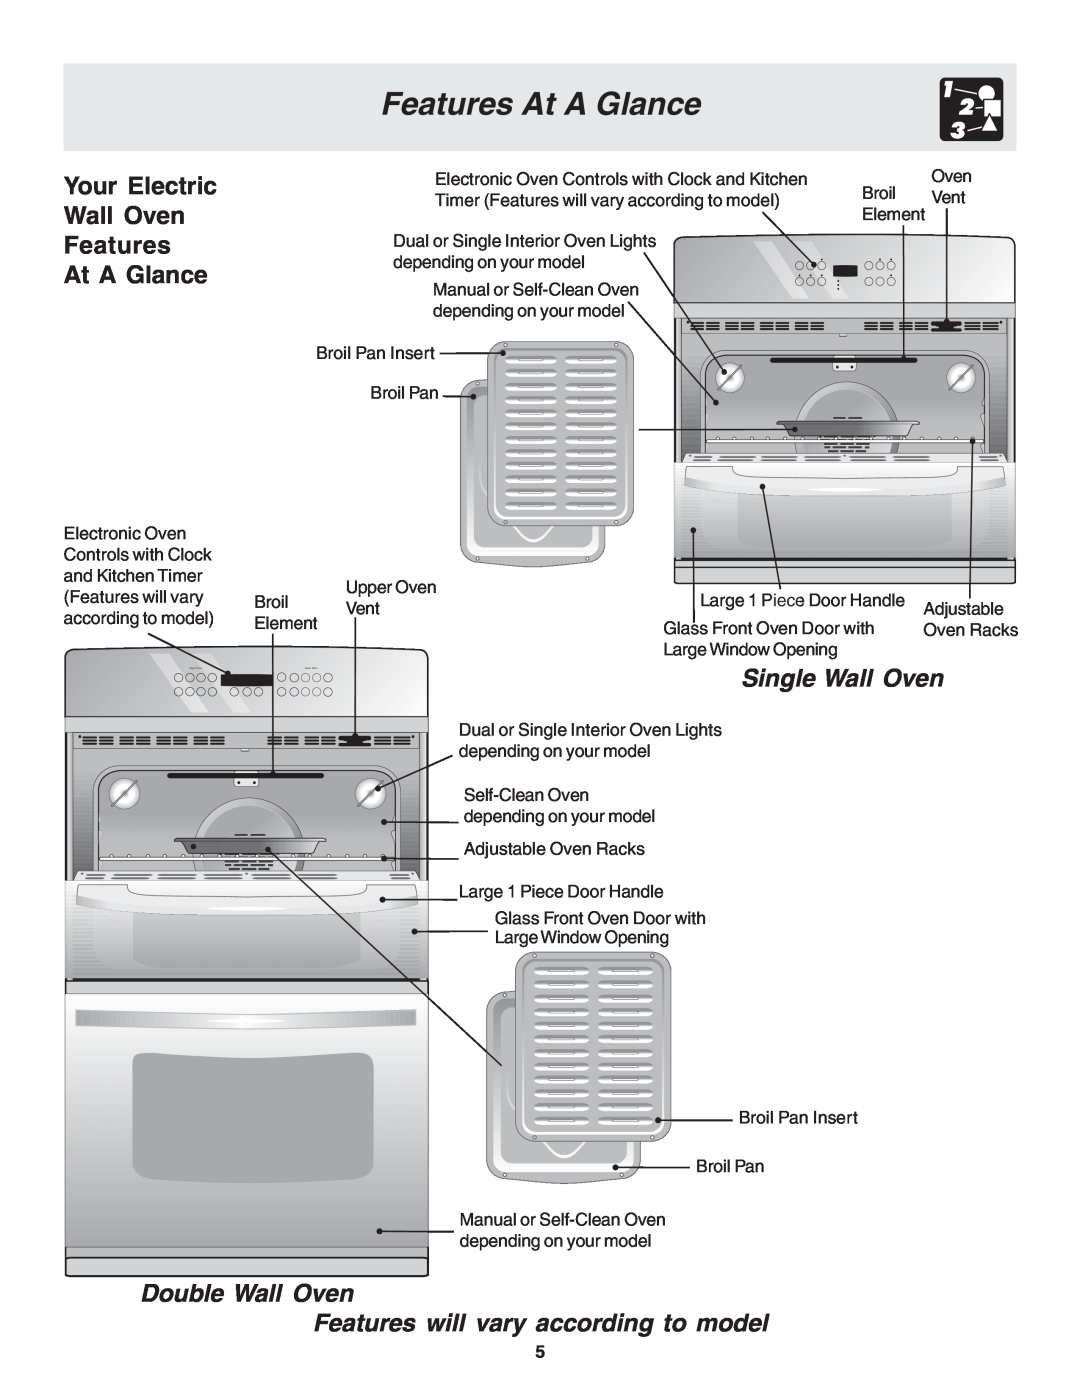 Frigidaire 318200943 warranty Your Electric Wall Oven Features At A Glance, Double Wall Oven, Single Wall Oven 